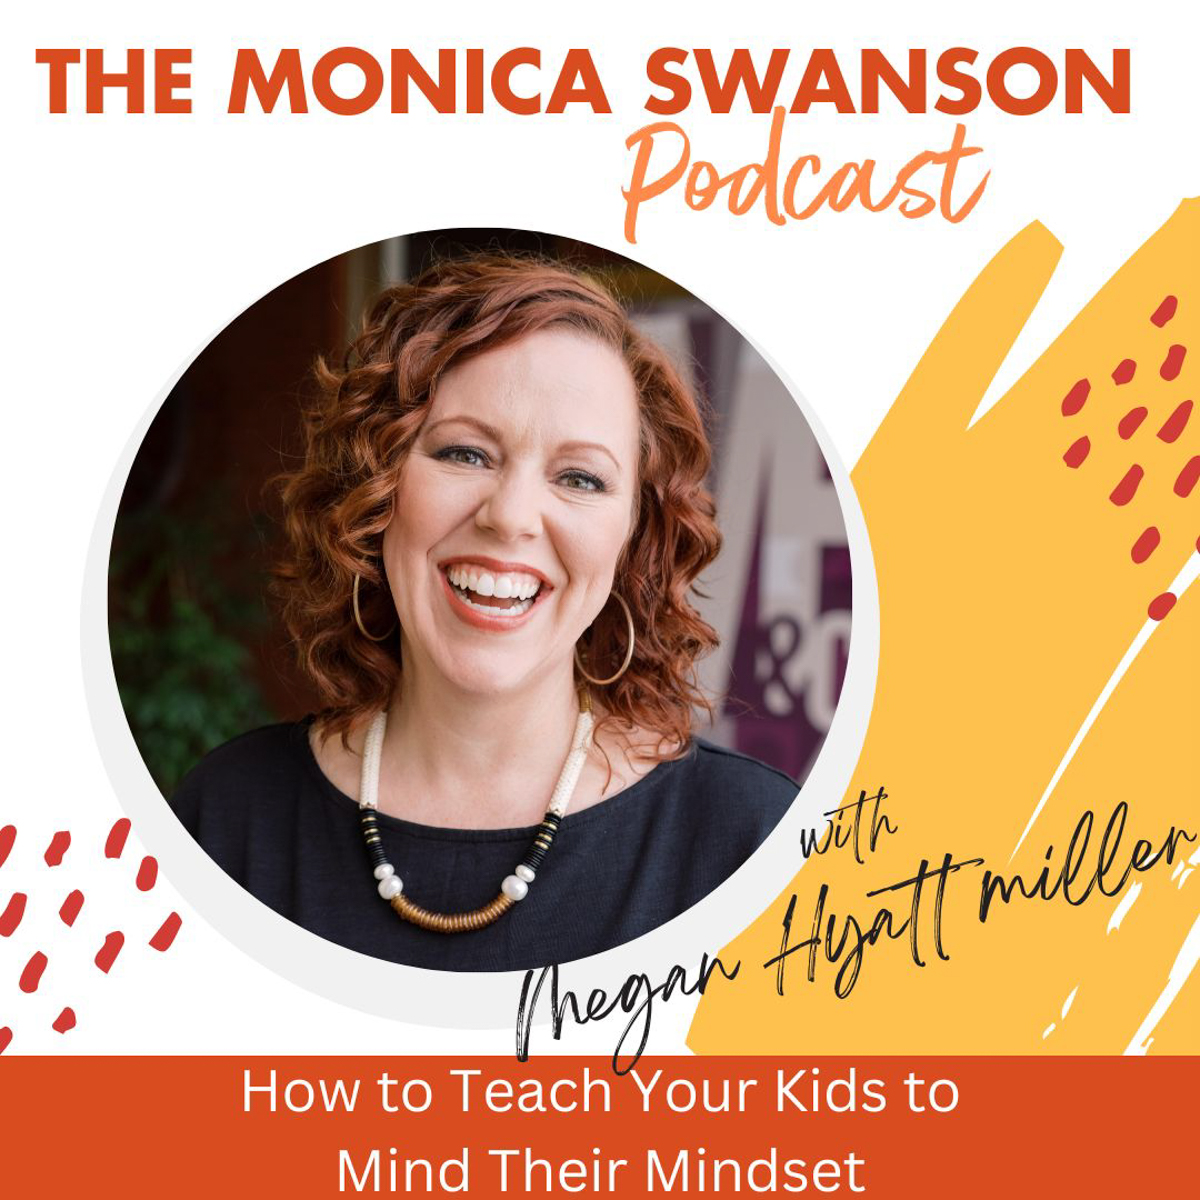 How to Teach Your Kids to Mind Their Mindset, with Megan Hyatt Miller